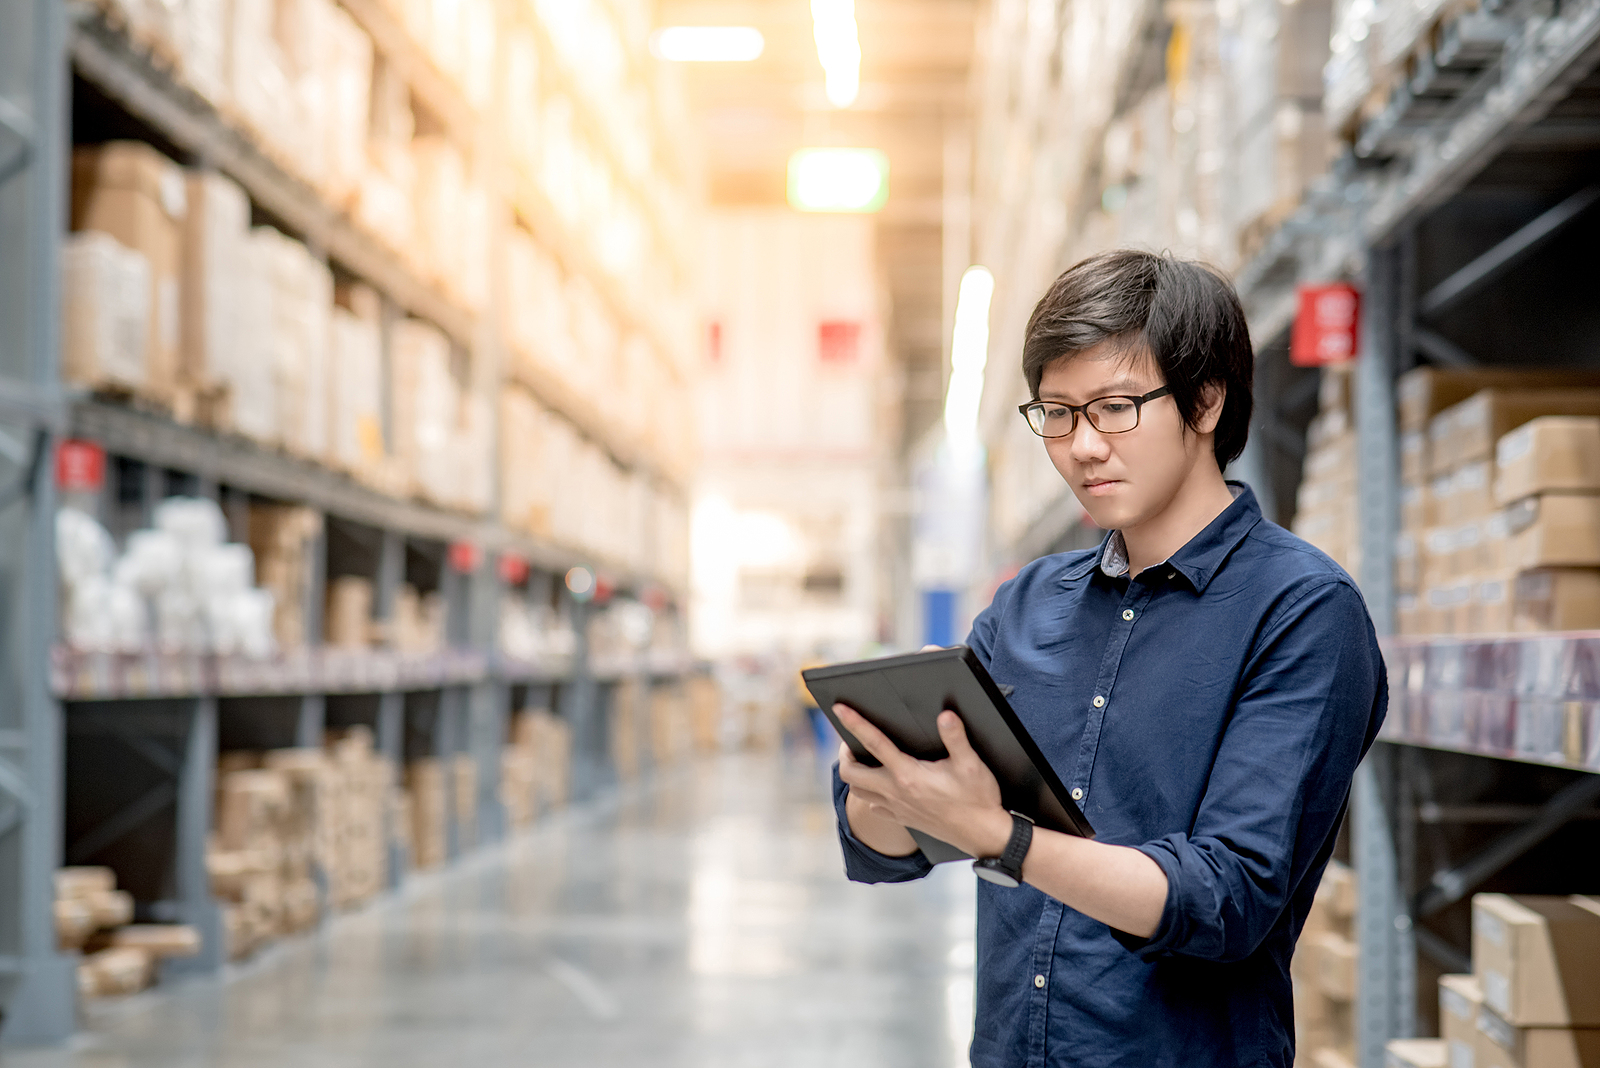 Mobile technology and IoT are transforming the supply chain and highlighting the importance of digital inventory.